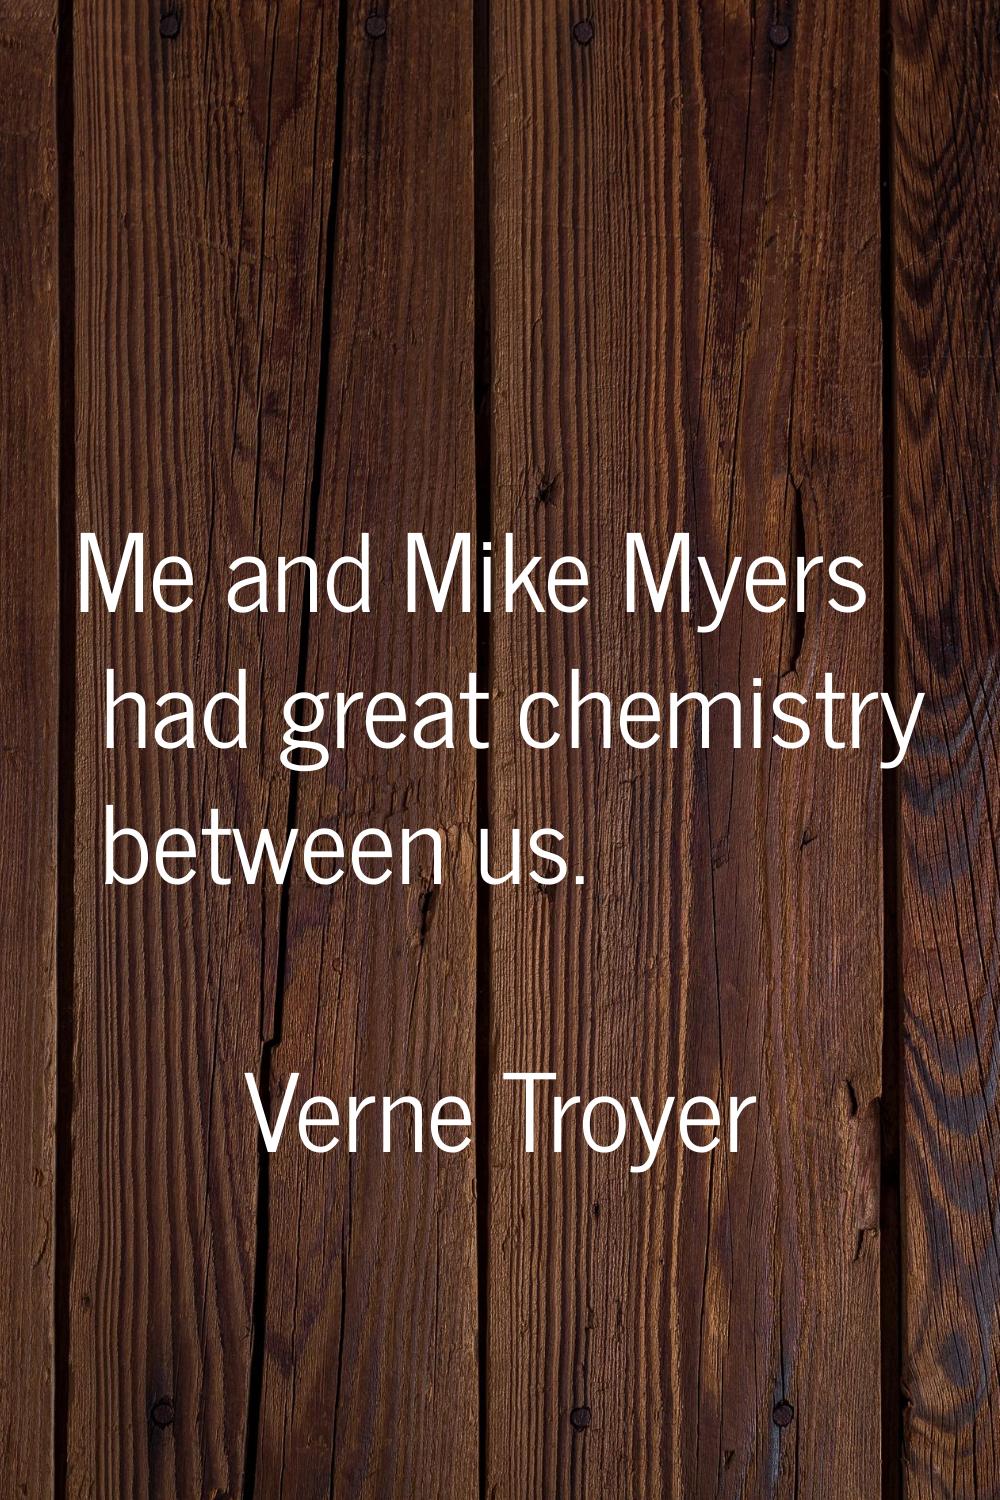 Me and Mike Myers had great chemistry between us.